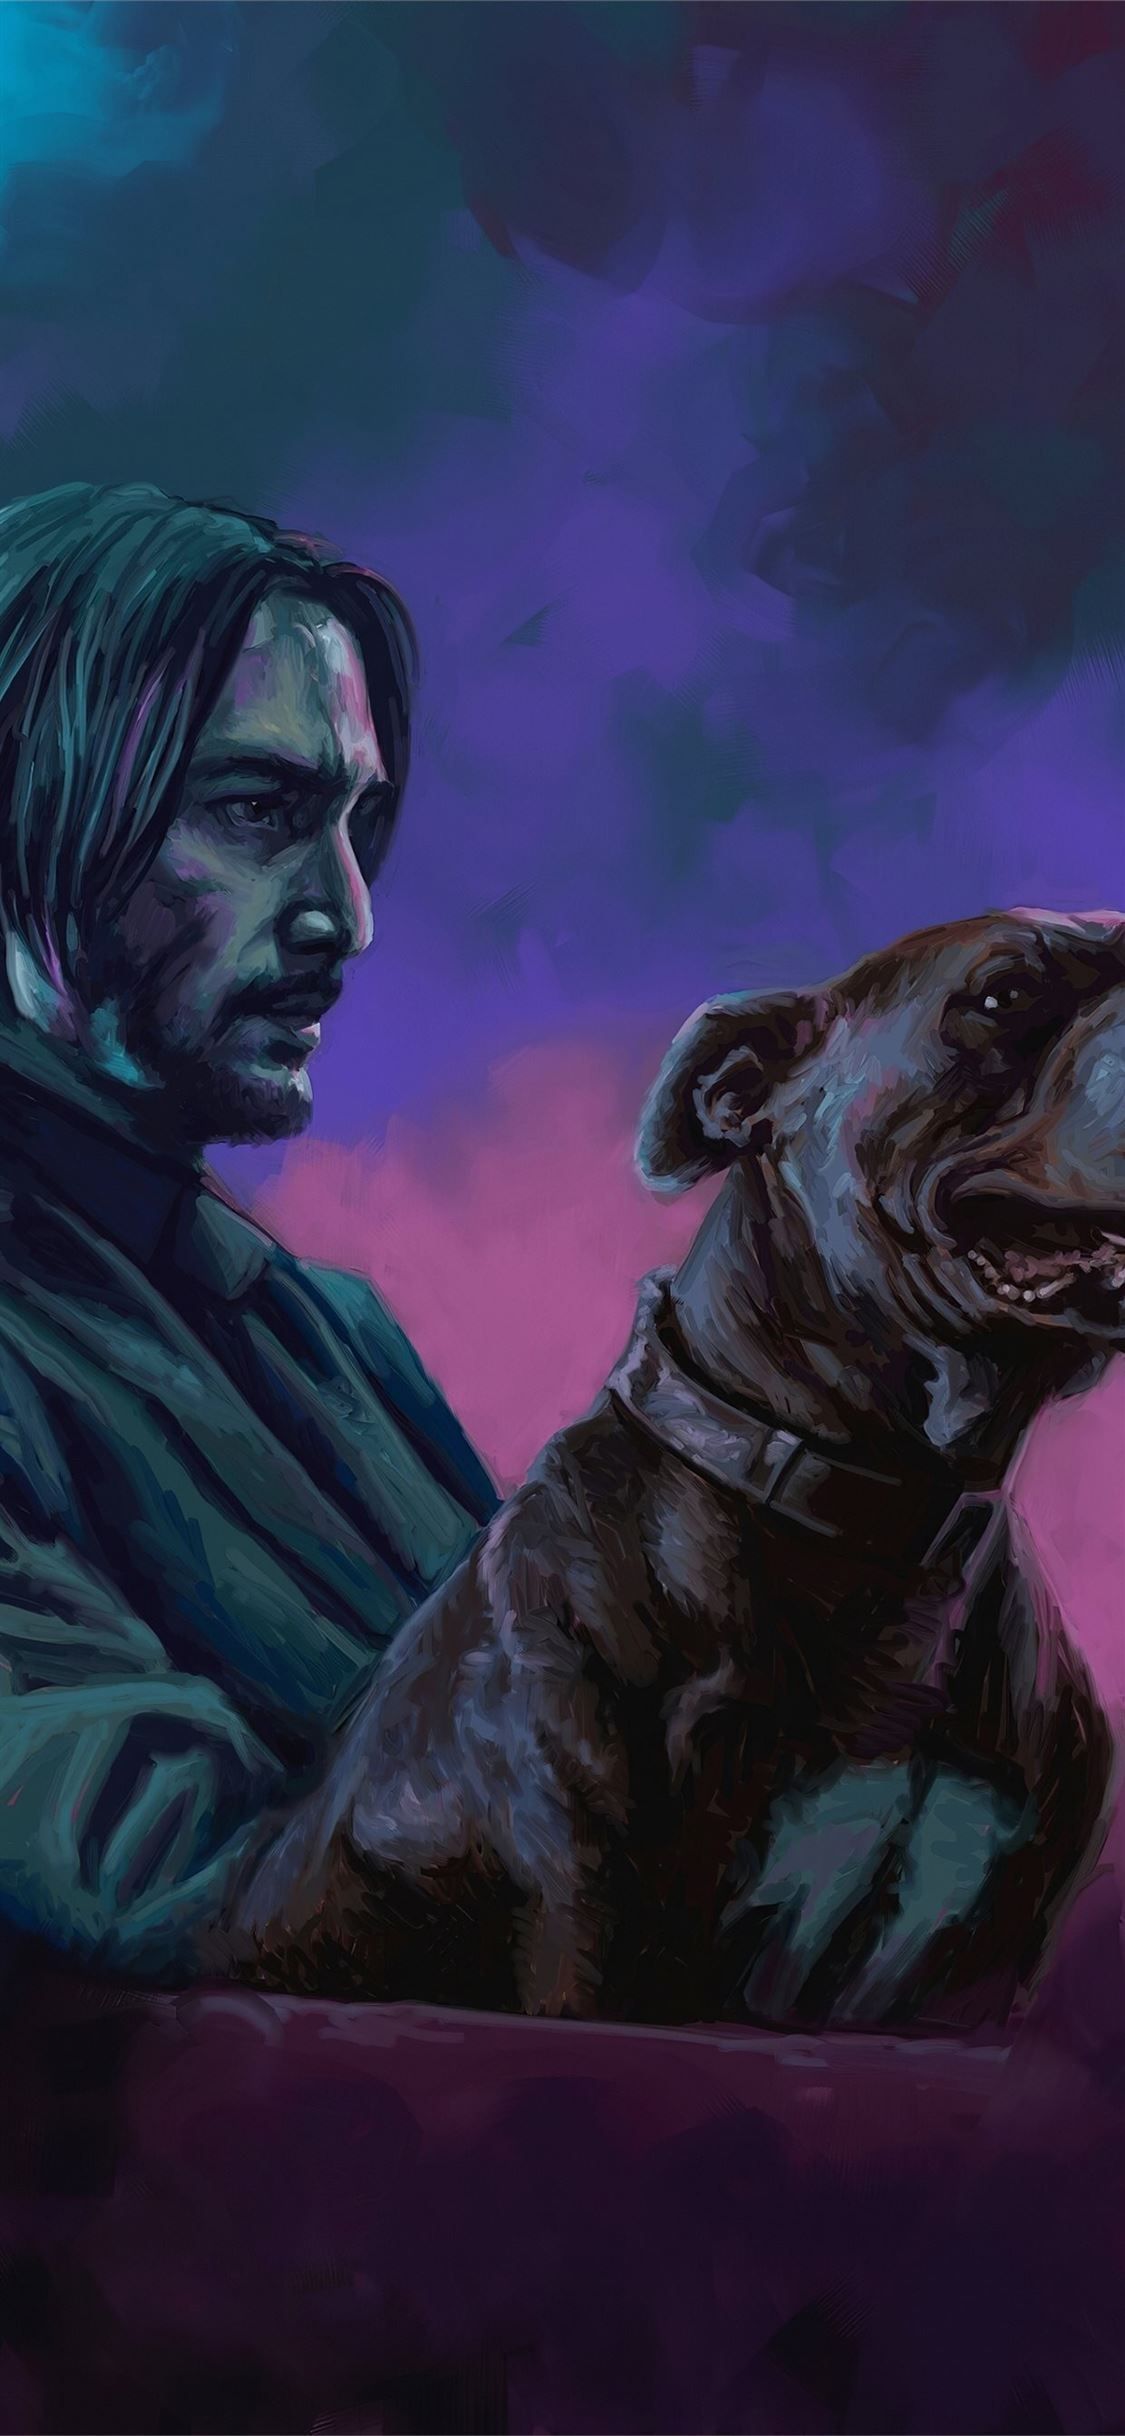 john wick with dog art iPhone X Wallpaper Free Download